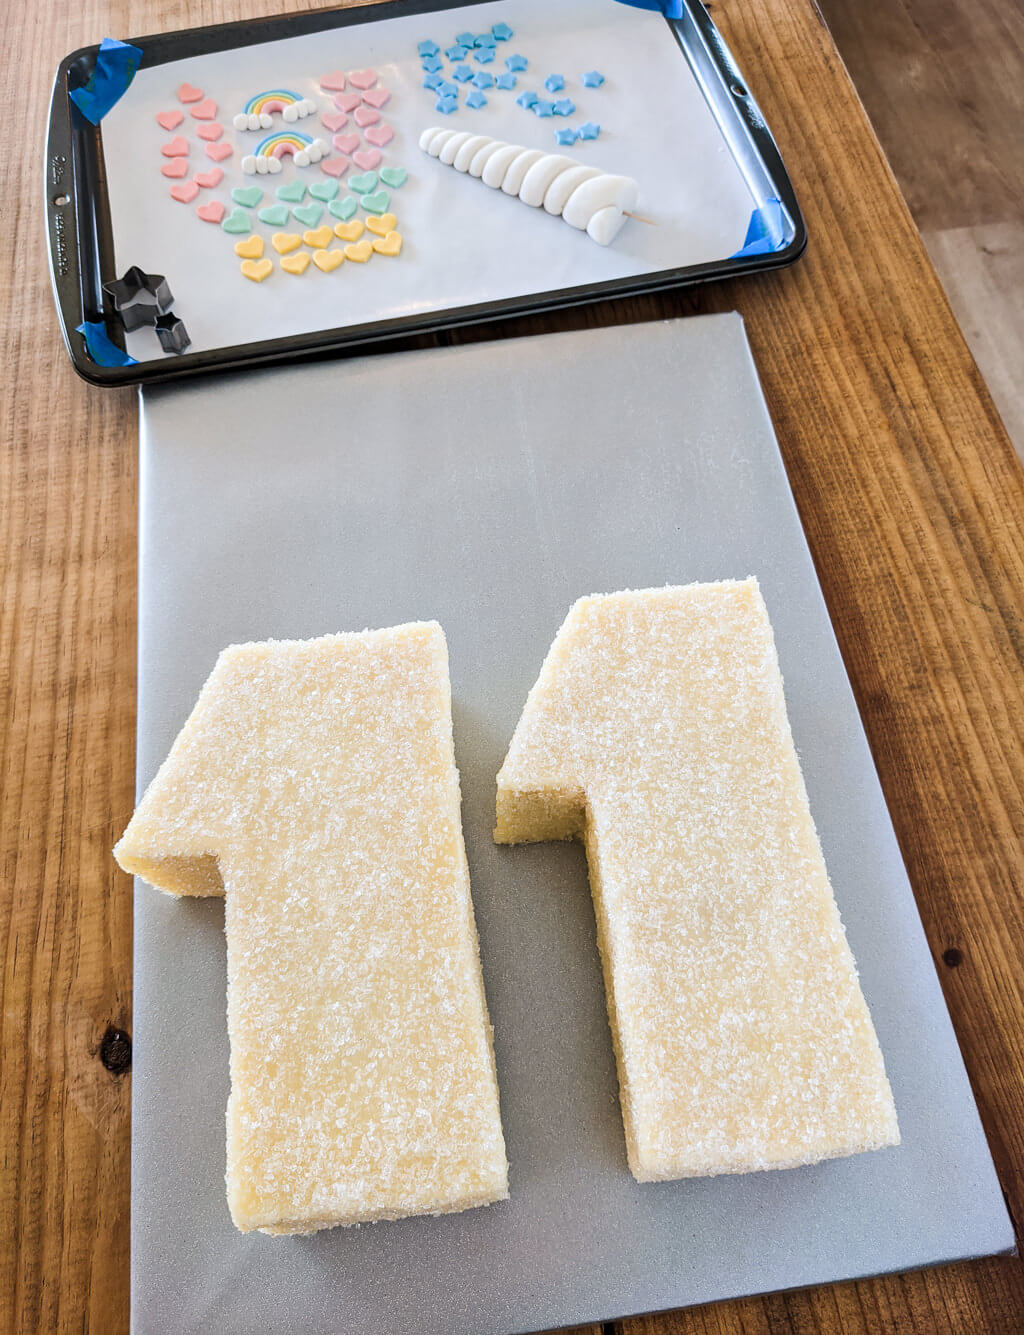 How to put sanding sugar on a cake